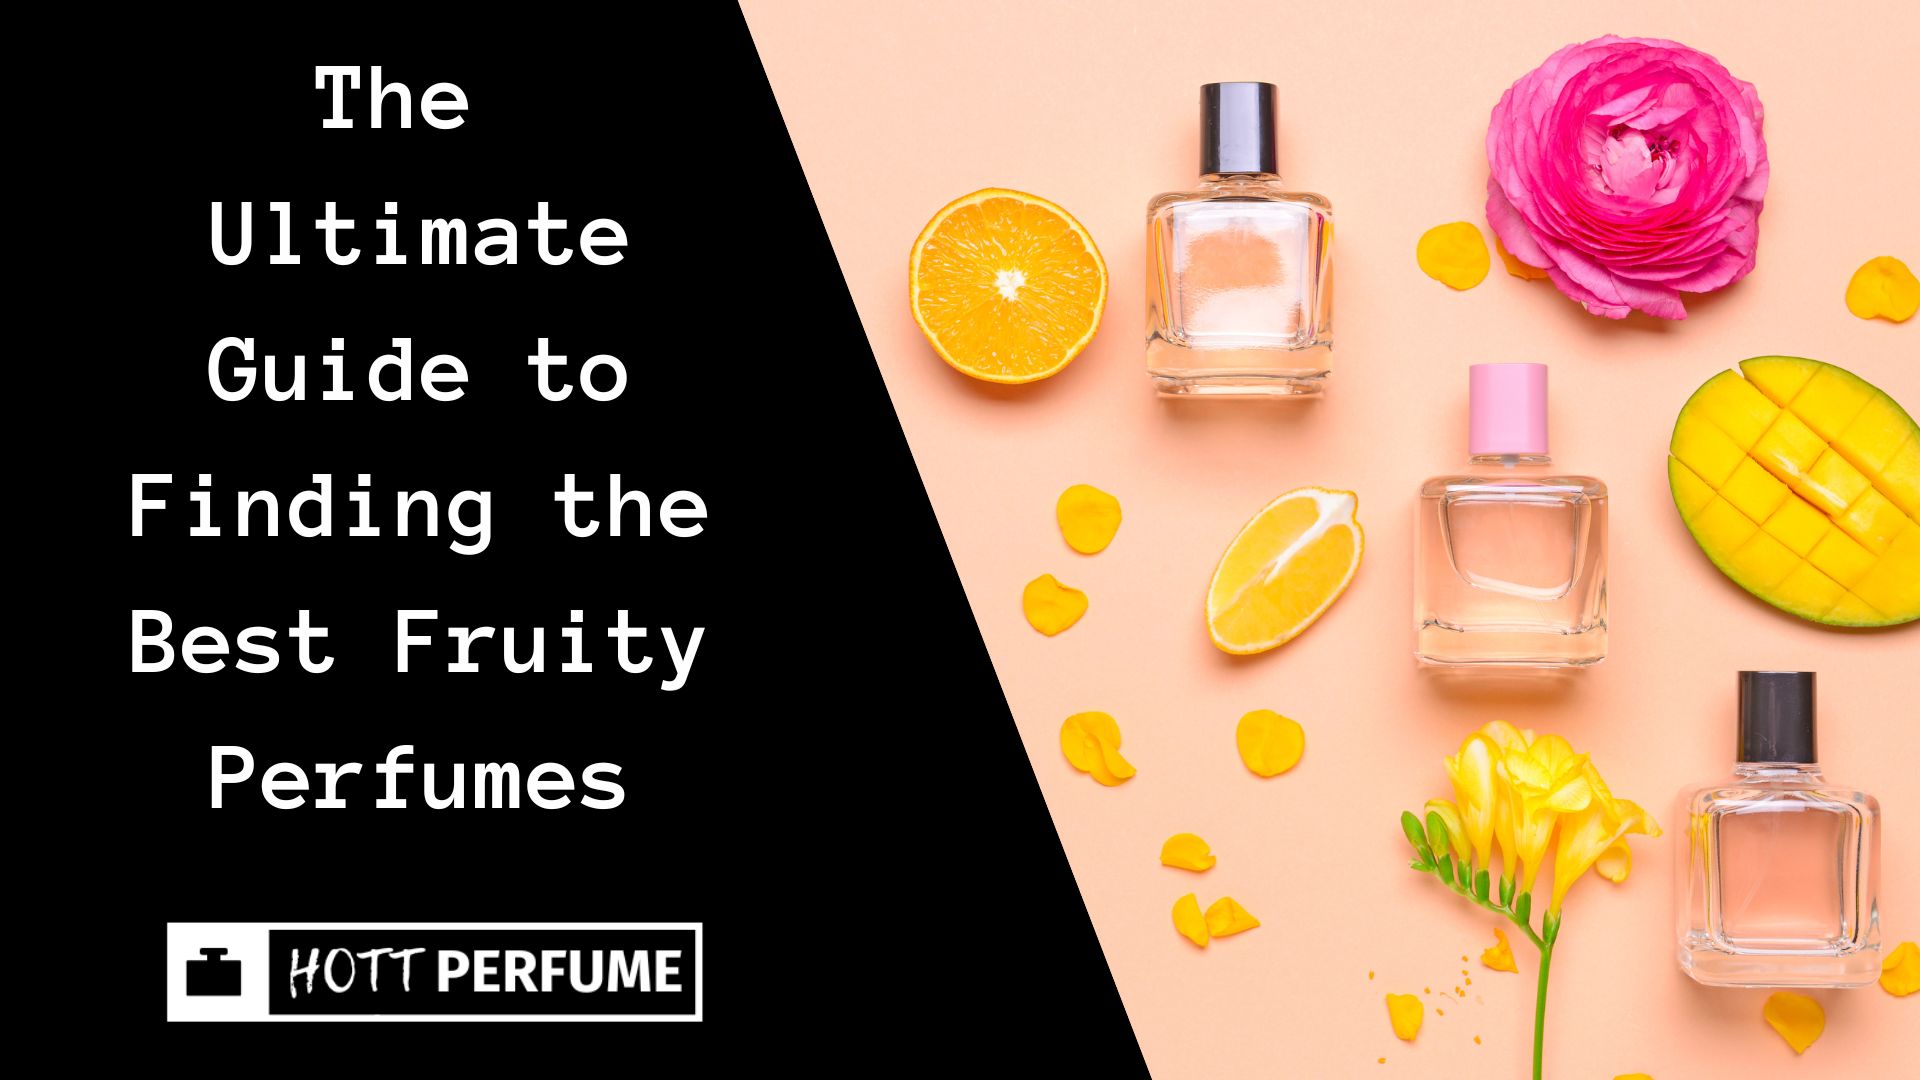 The Ultimate Guide to Finding the Best Fruity Perfumes